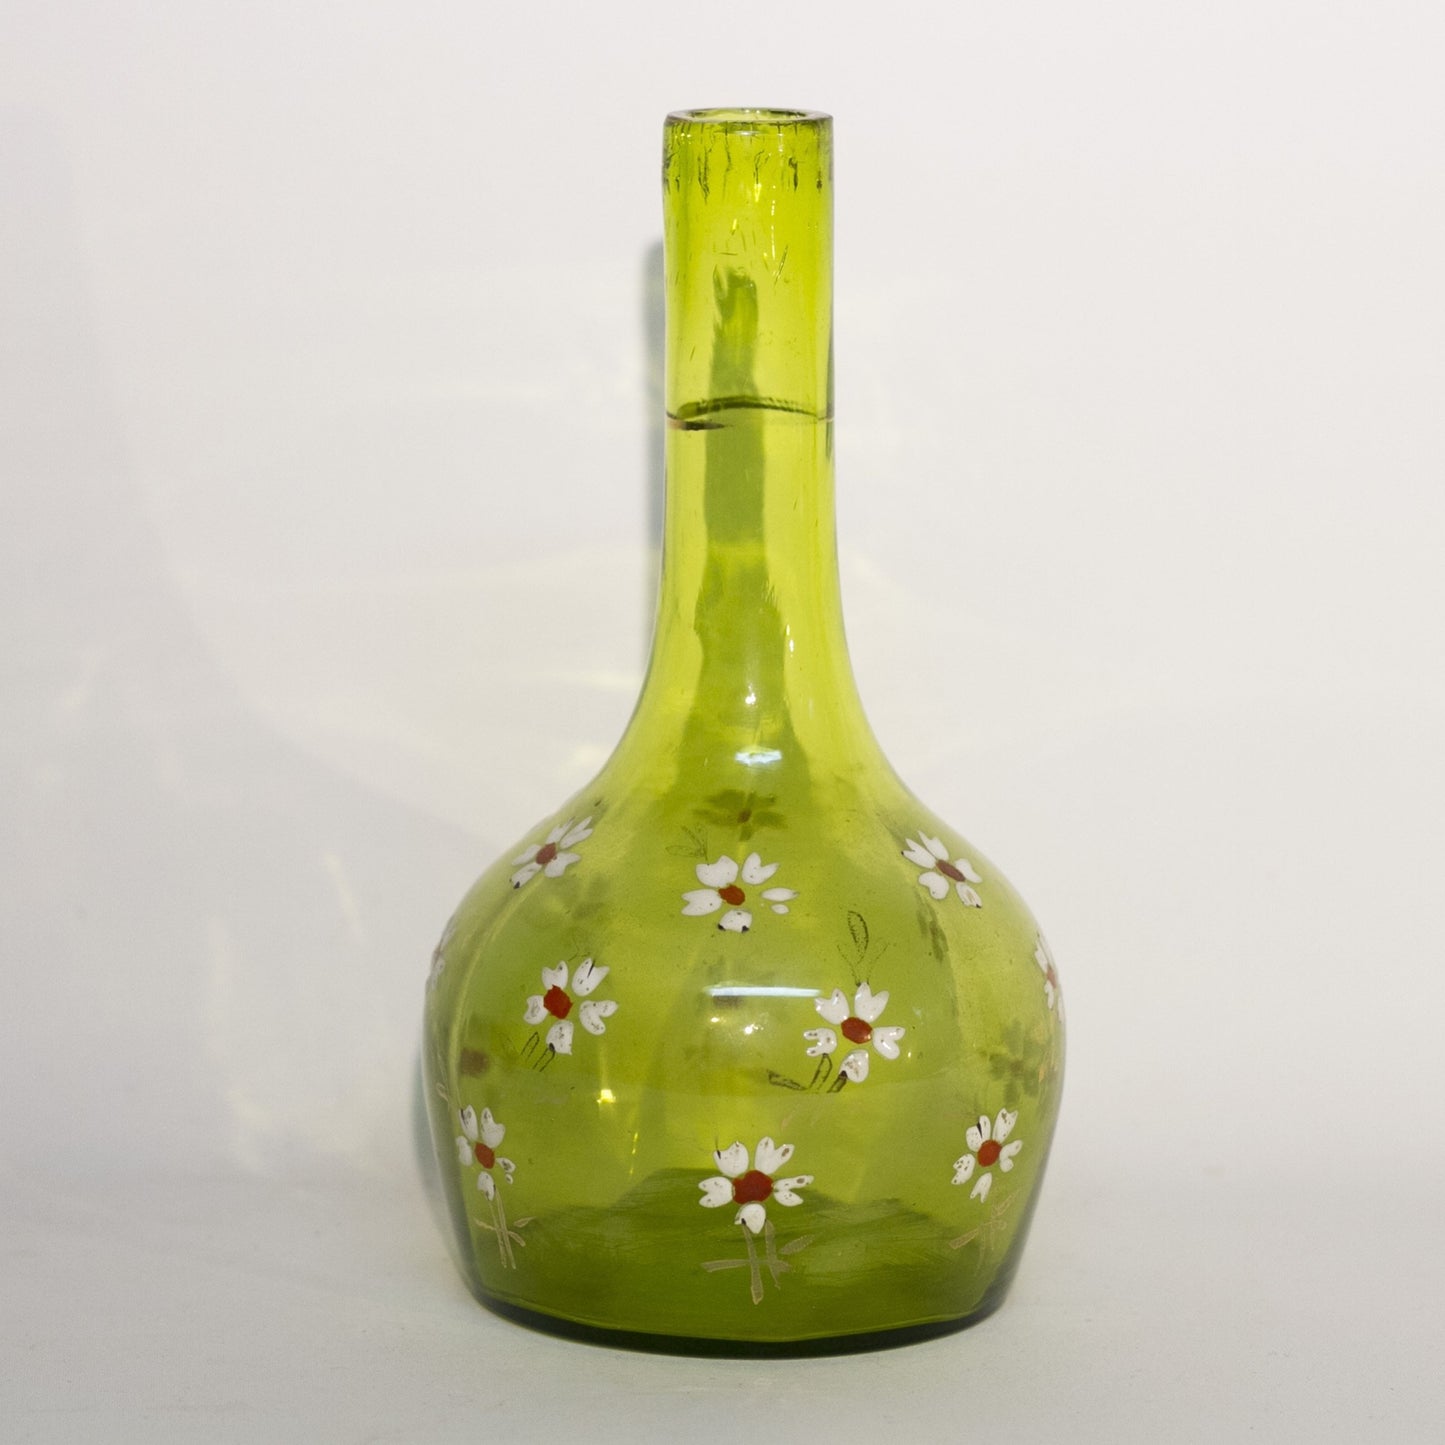 VICTORIAN ENAMELED BARBER BOTTLE Apple Green Colored Glass with Gold Gilt and Hand Painted White Enamel Daisies Circa 1880-1910